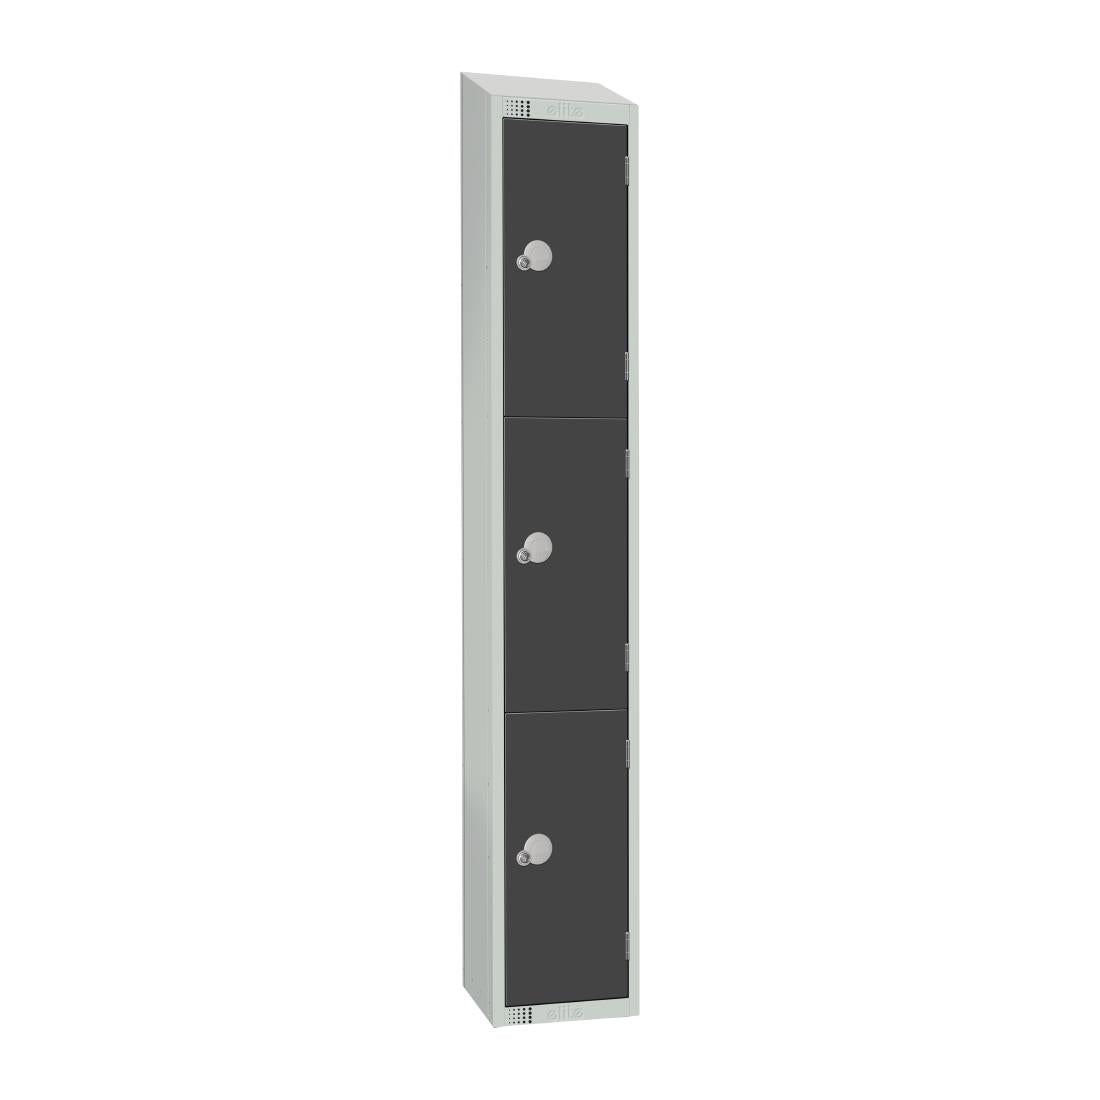 GR679-CNS Elite Three Door Coin Return Locker with Sloping Top Graphite Grey JD Catering Equipment Solutions Ltd